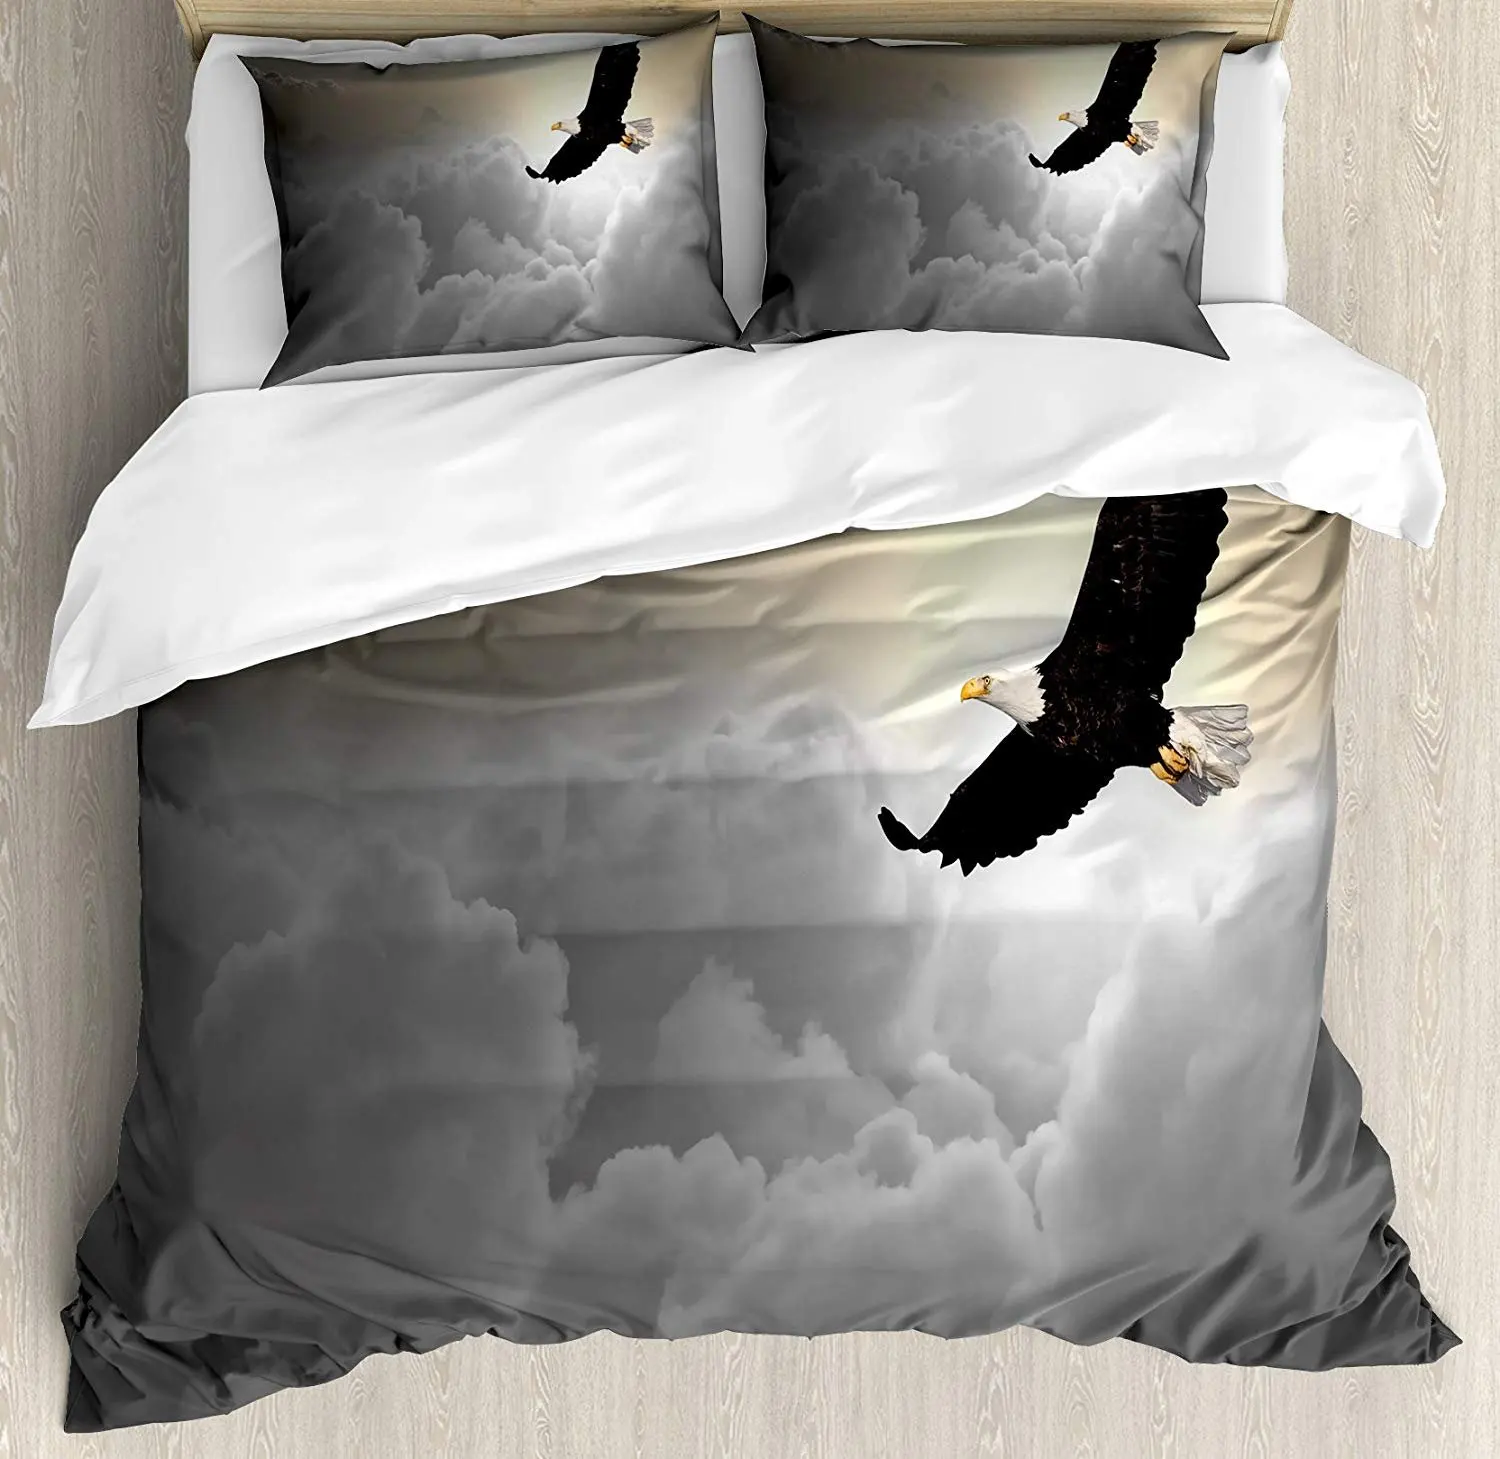 Eagle Bedding Set Majestic Creature Flying above Clouds Liberty Democracy and Freedom Pillowcases Quilt Cover Bed Set For Home